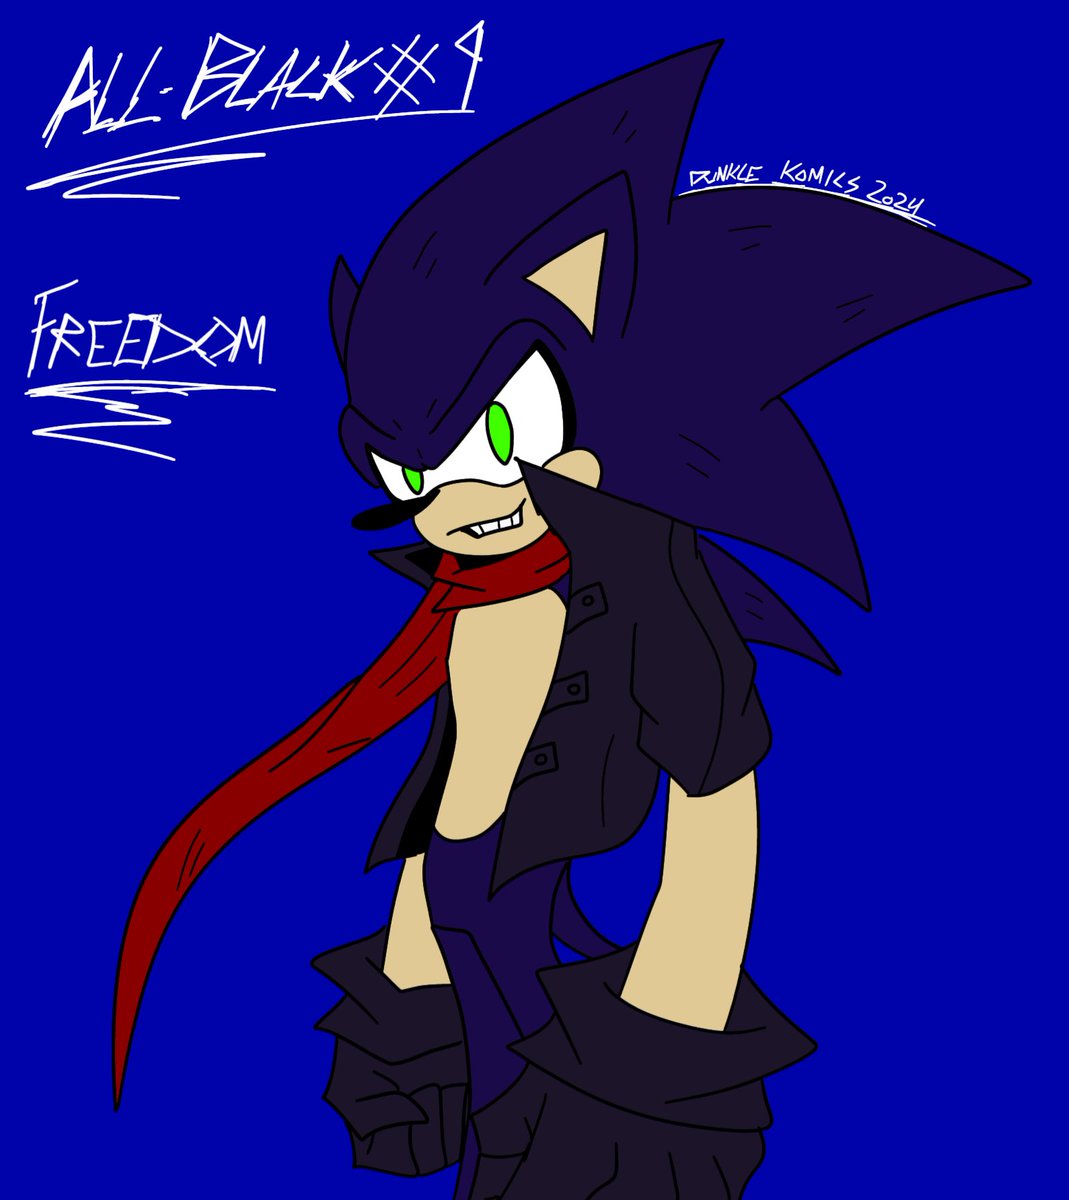 All-Black Day #9: Freedom

The suit dyed him fr fr
#Sonic #Symbiote #AllBlack